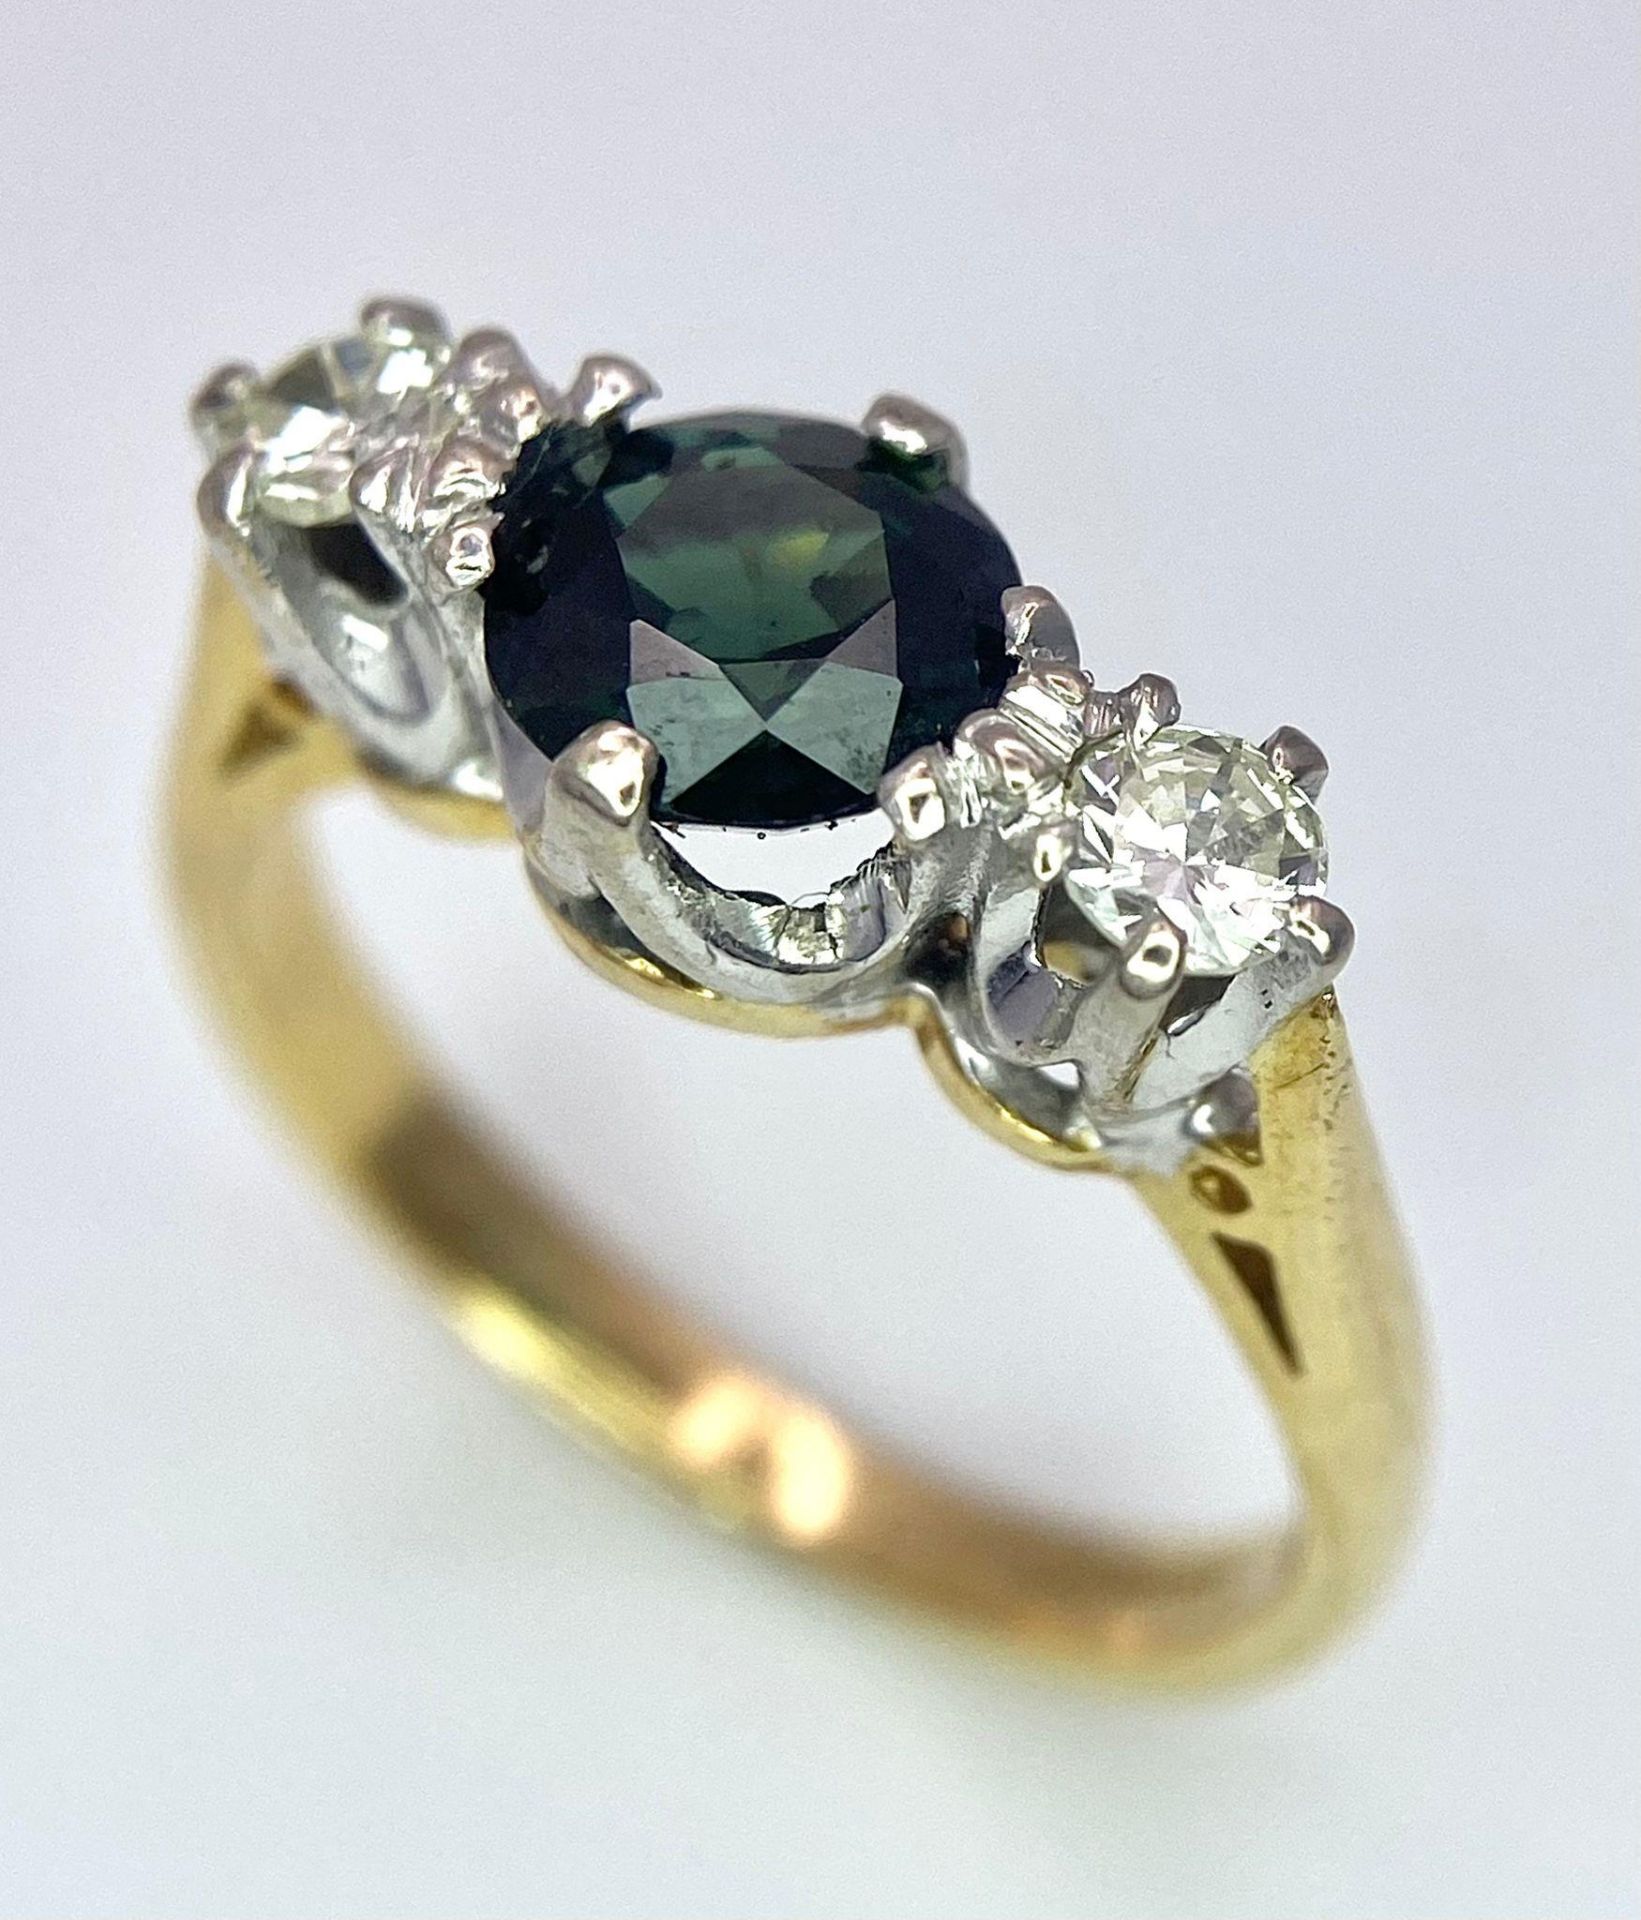 An 18K White Gold, Diamond and Sapphire Ring. Central round cut sapphire with a diamond either side.